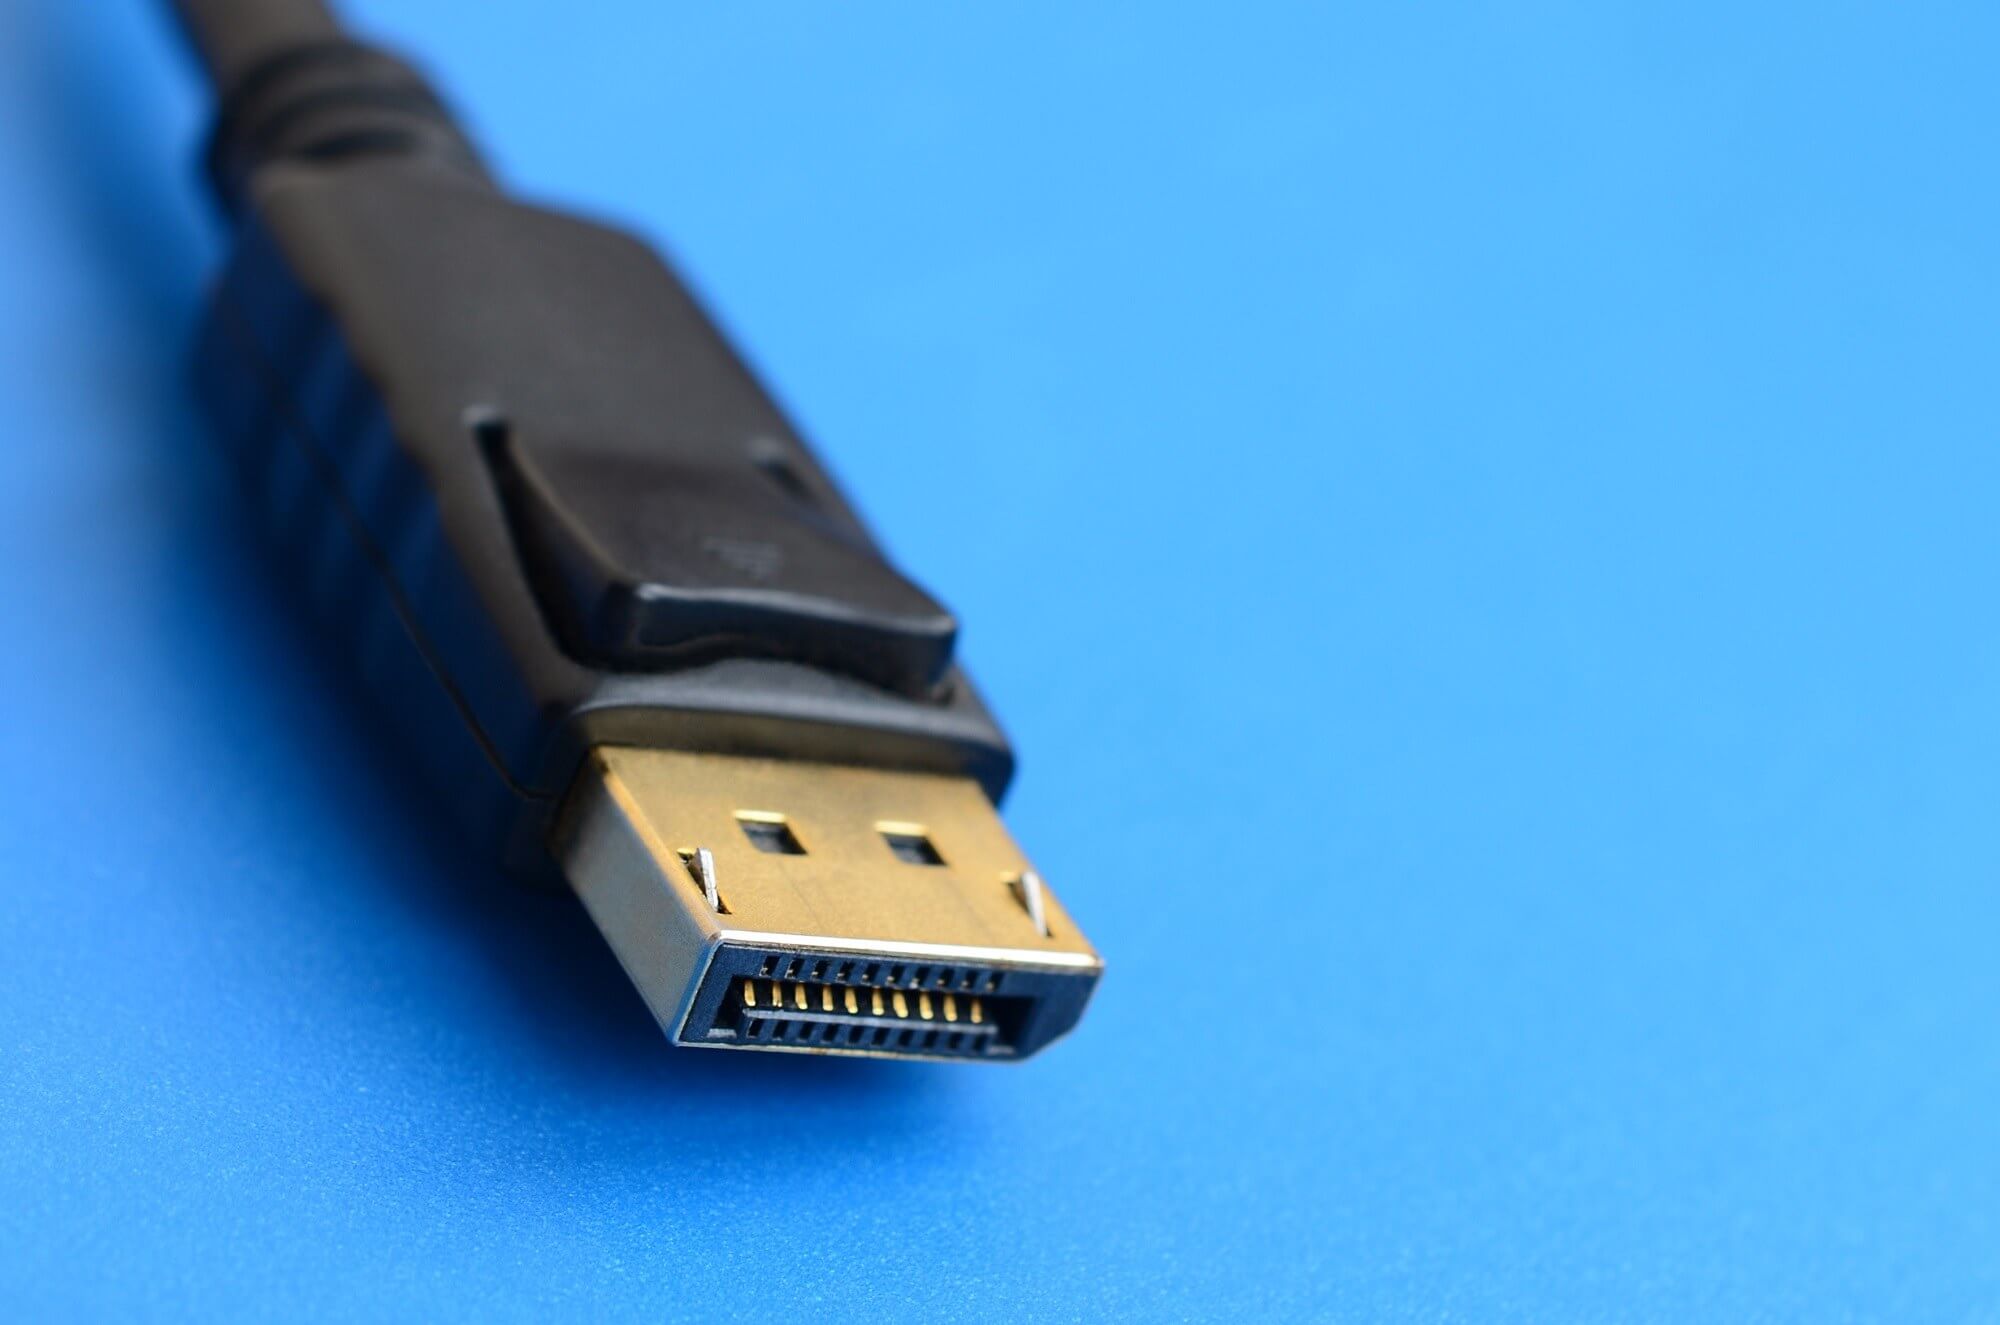 DisplayPort 2.0 officially revealed, supports 16K resolutions at 60Hz